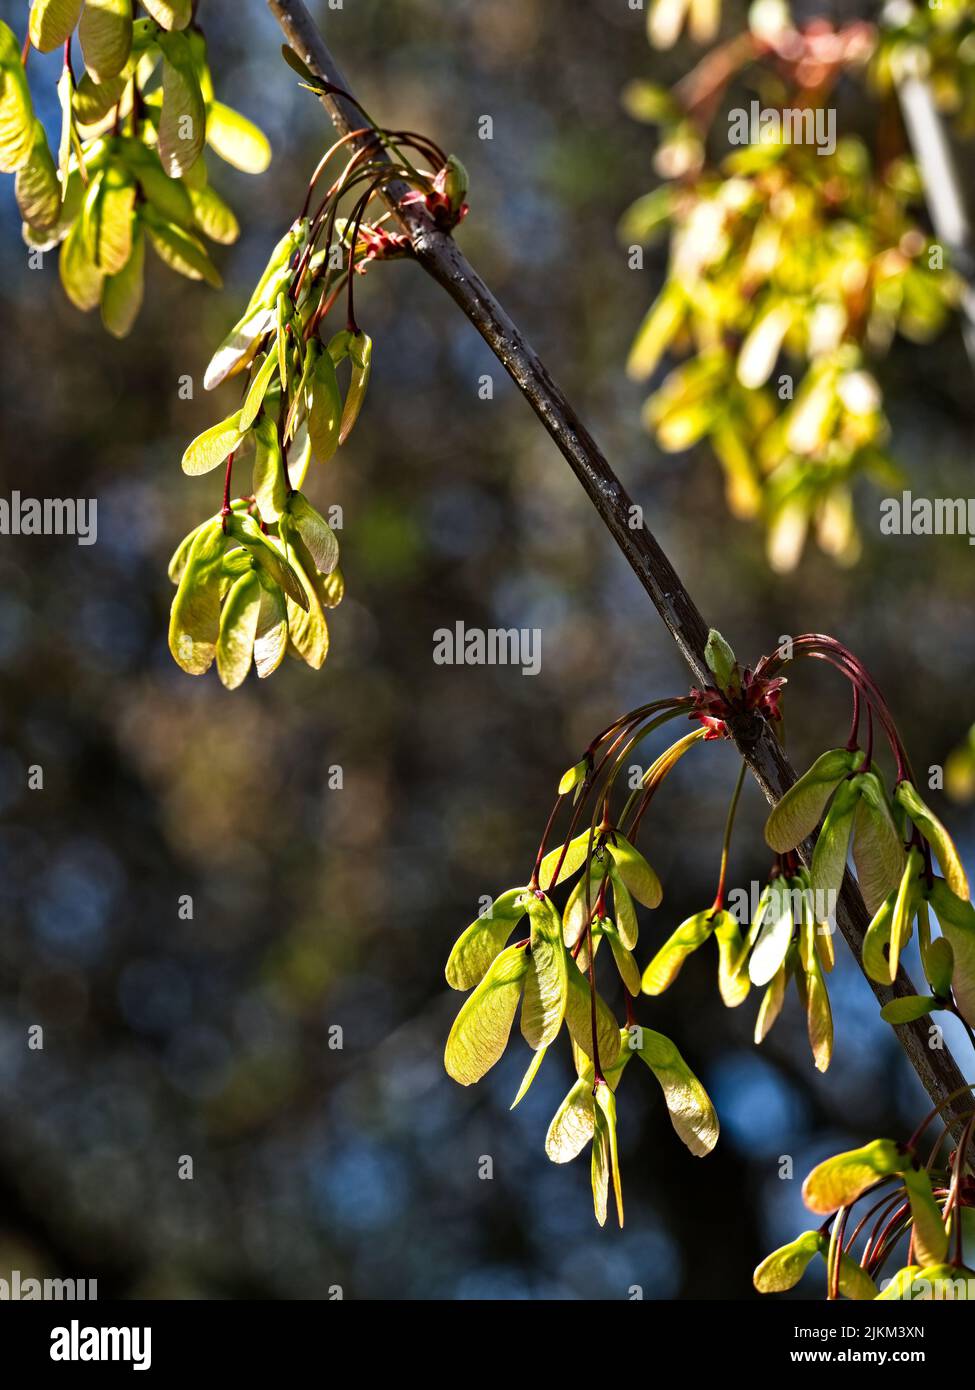 A vertical shot of ash-leaved maple tree branch in the blurry background. Stock Photo